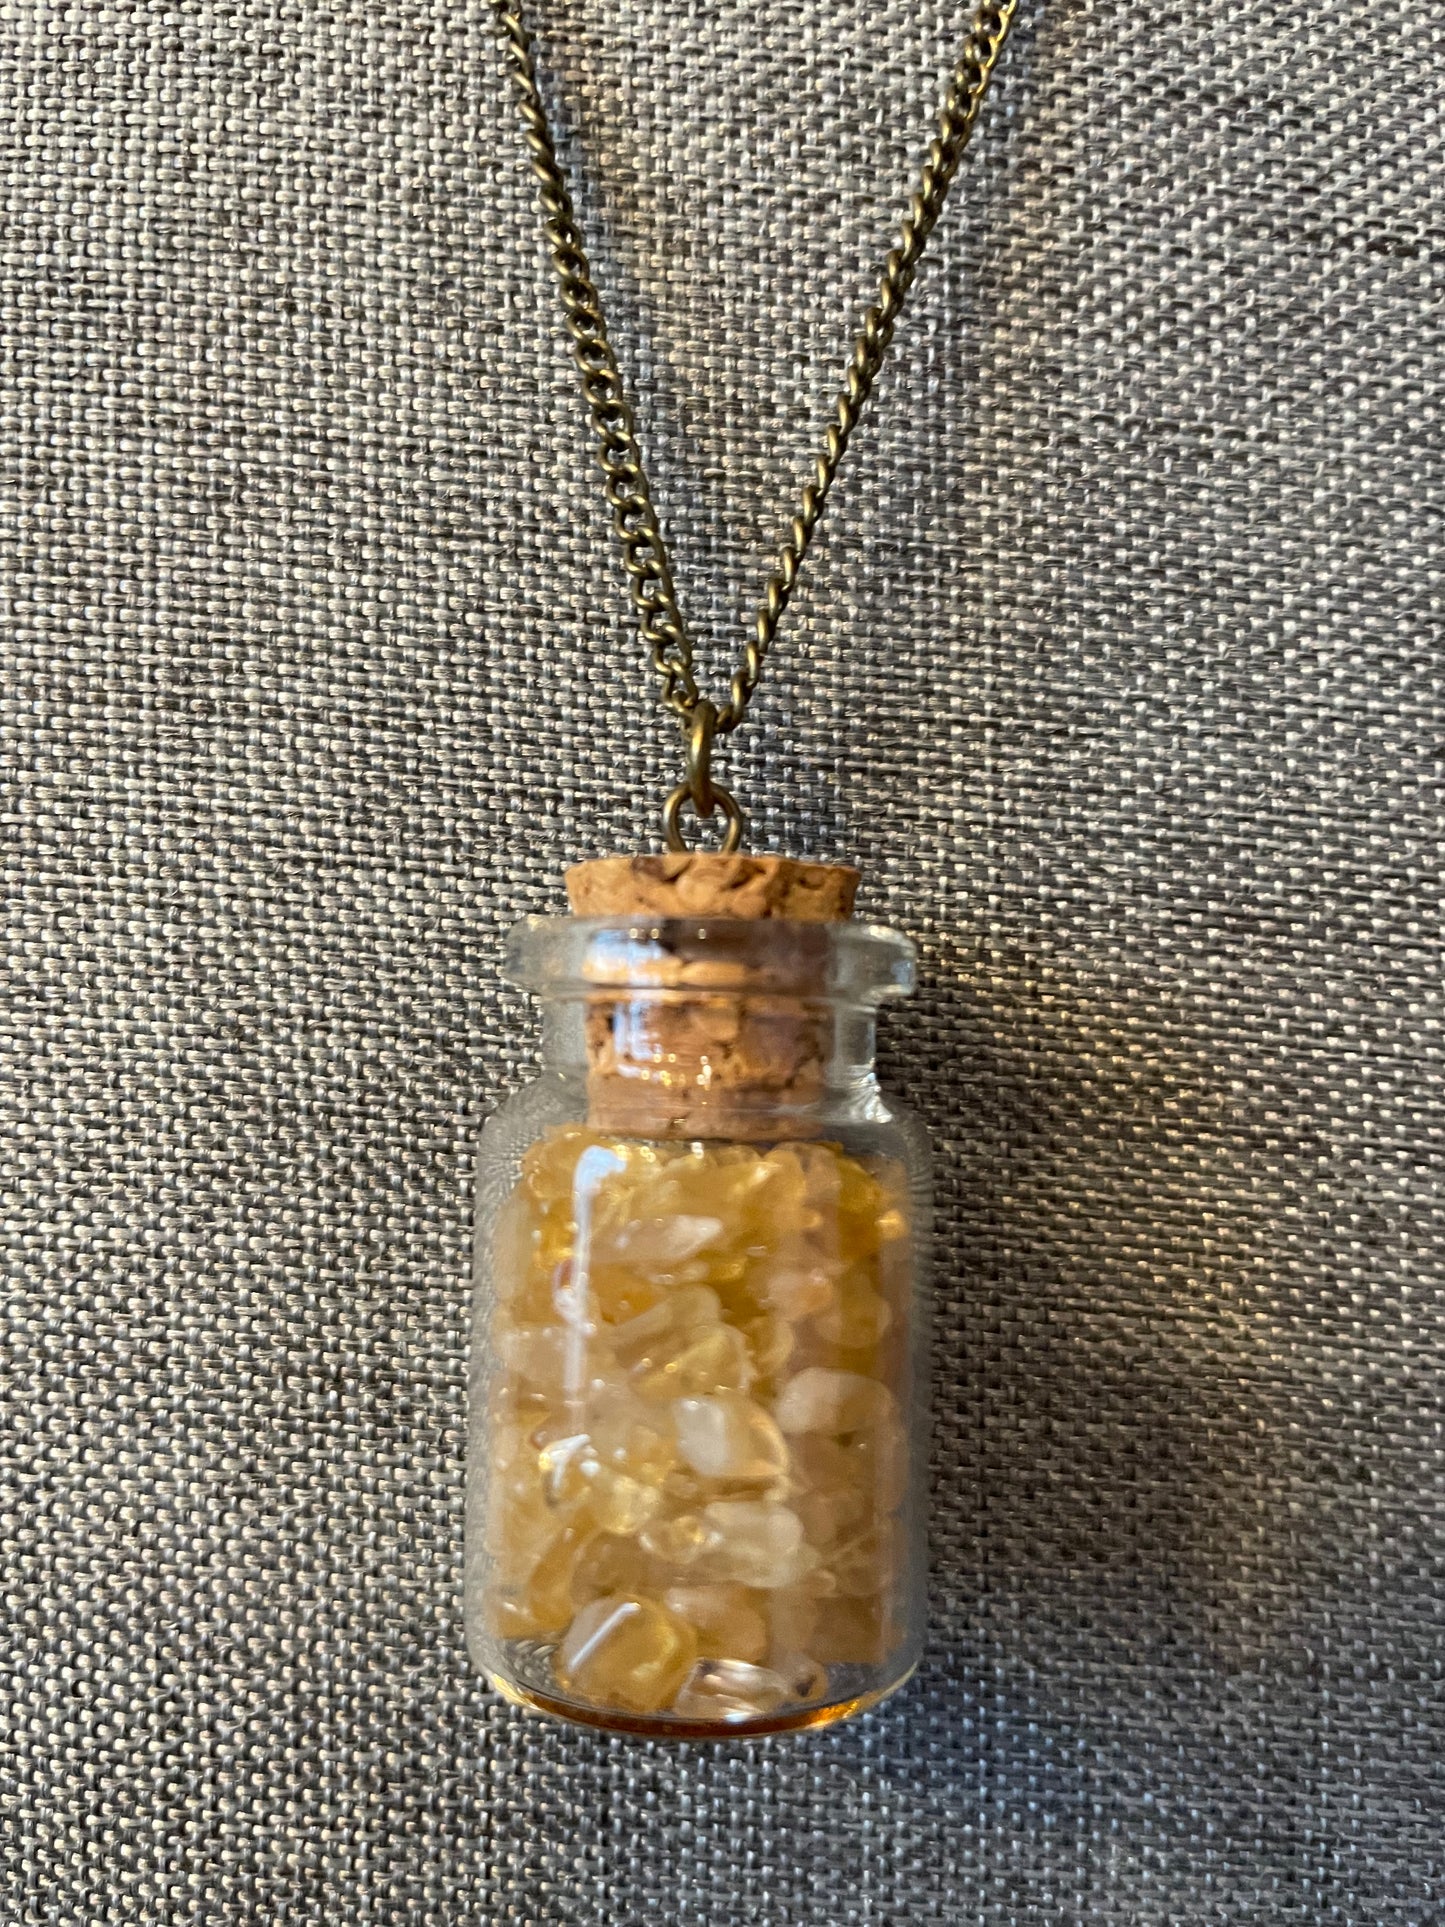 Stone Chips Bottle Necklace Assortment - Choose from 8 Crystal types!